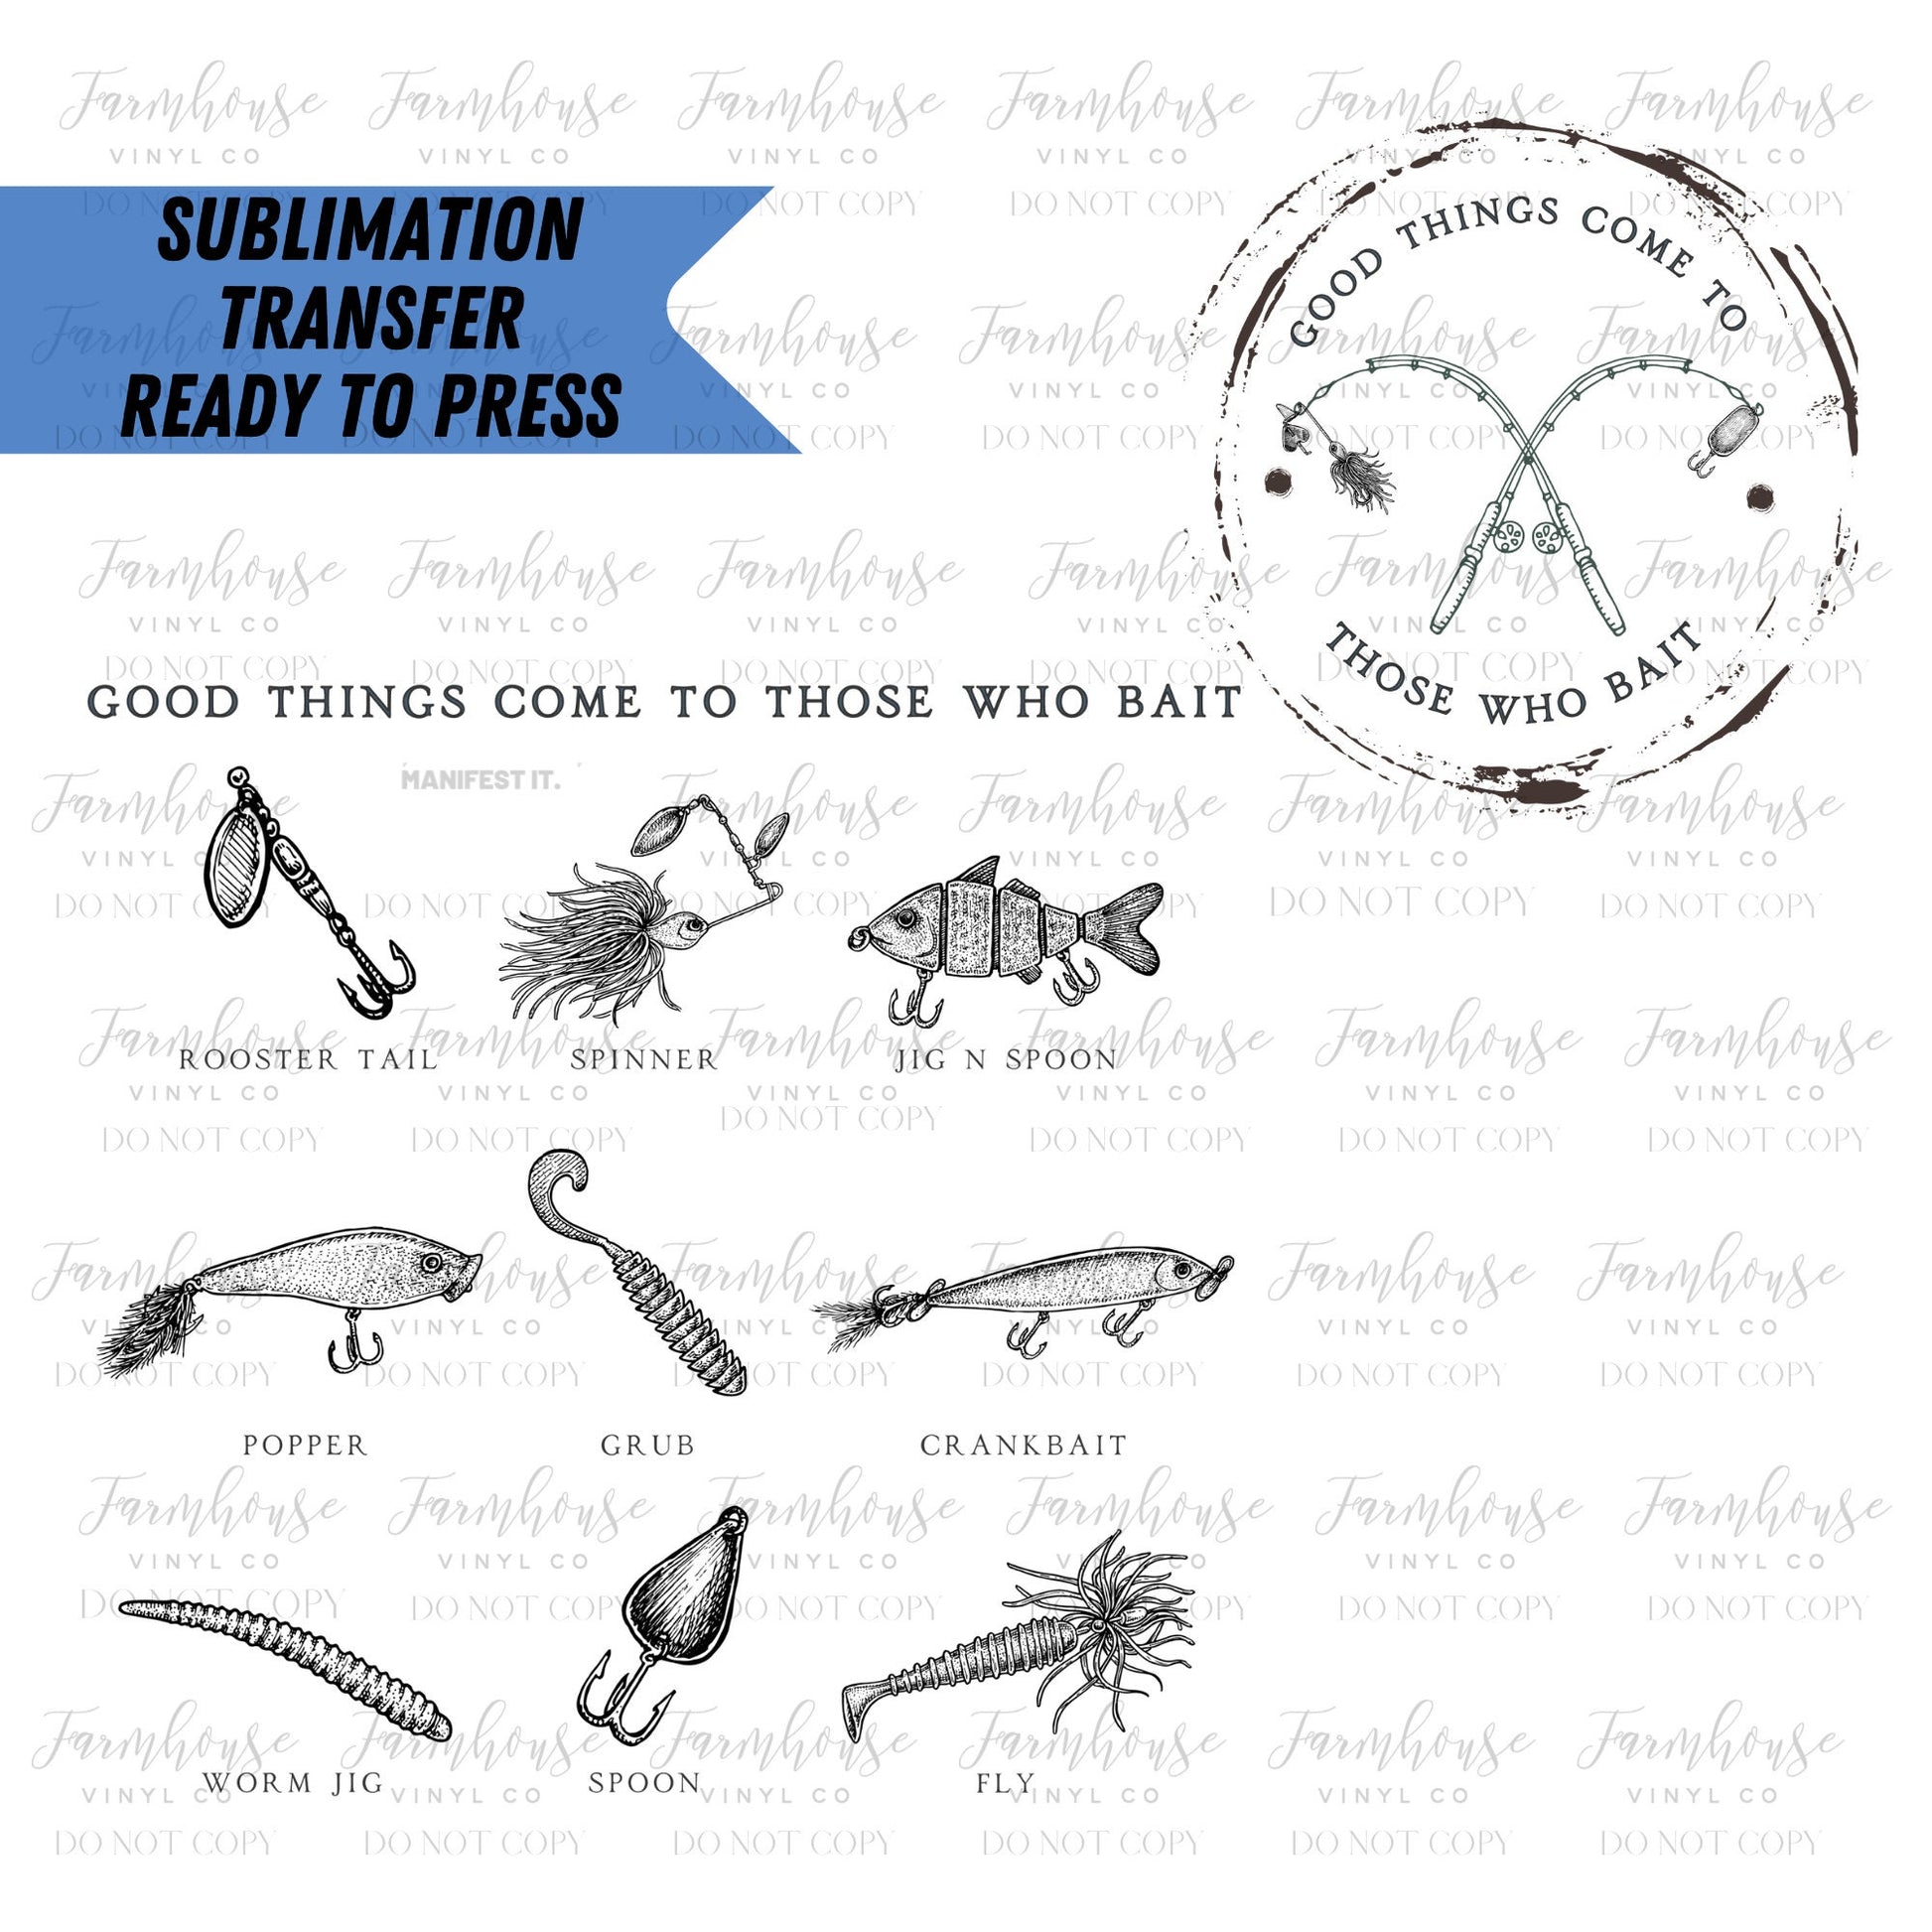 Good Things Come to Those Who Bait, Classic Fishing Transder, Father's Day Design, Ready To Press, Sublimation Transfers, Father Son Design - Farmhouse Vinyl Co